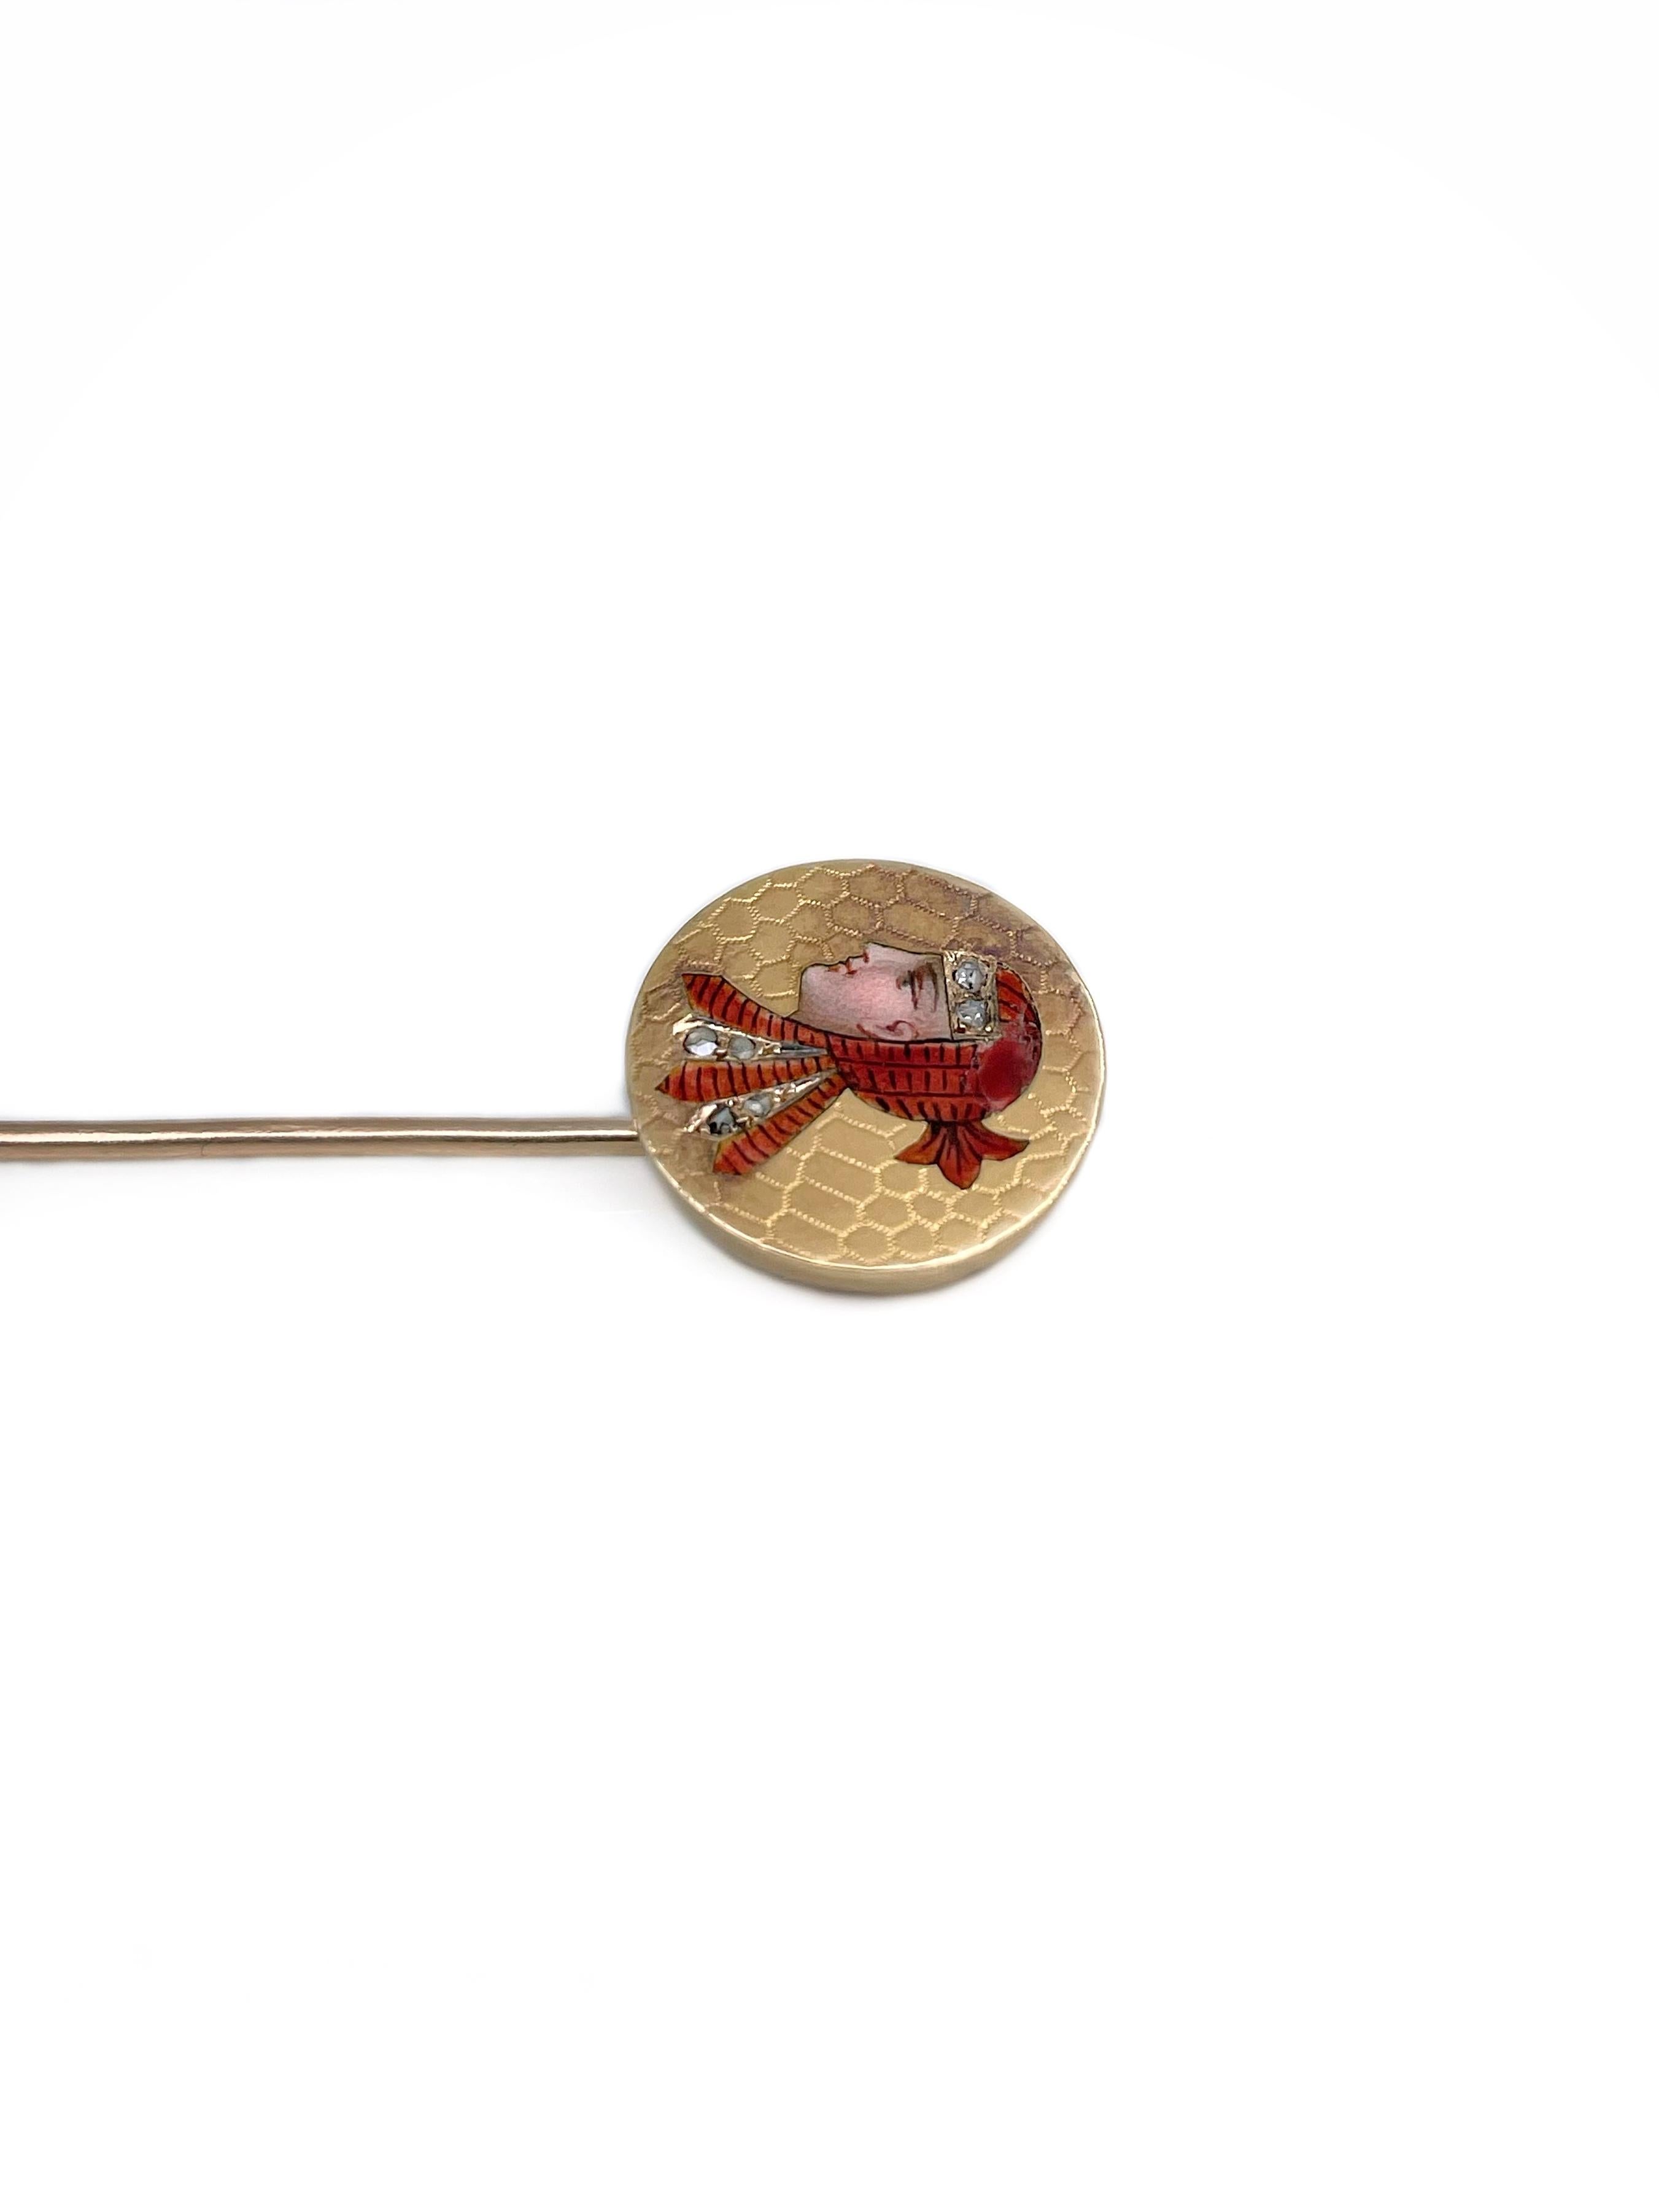 This is a Victorian Egyptian Revival stick pin brooch crafted in 18K gold. Circa 1890. 

The piece depicts a portrait made in red enamel and rose cut diamonds. 

Weight: 3.32g
Length: 7.2m
Diameter: 1.4cm

———

If you have any questions, please feel